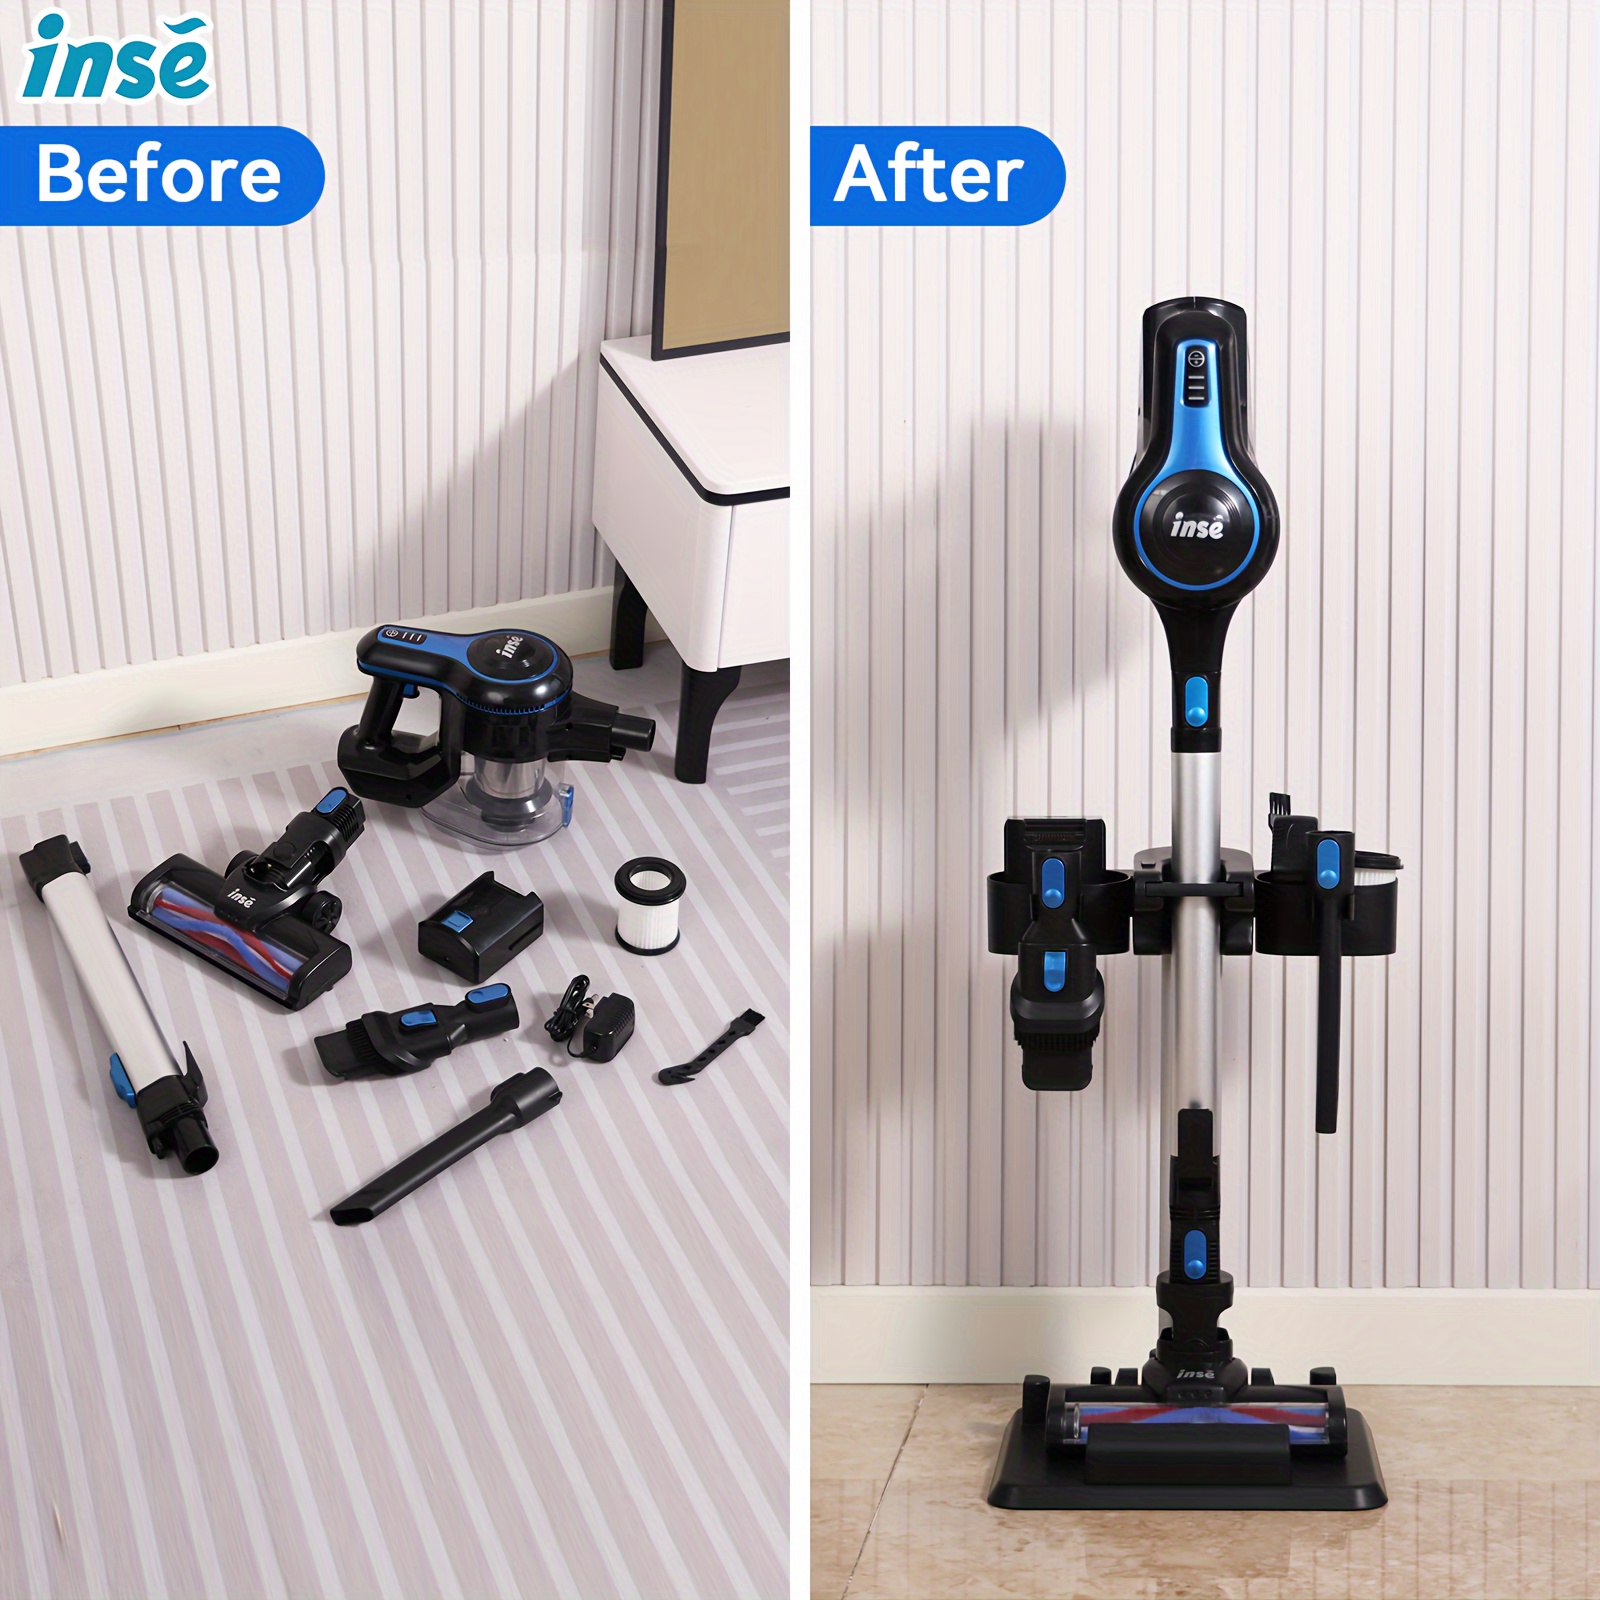 

(^_-) Umlo Vacuum Cleaner Stand, Suitable For Shark Umlo And Other Brands Of Vacuum Cleaners, Vacuum Stand For Stick Vacuum Cleaner